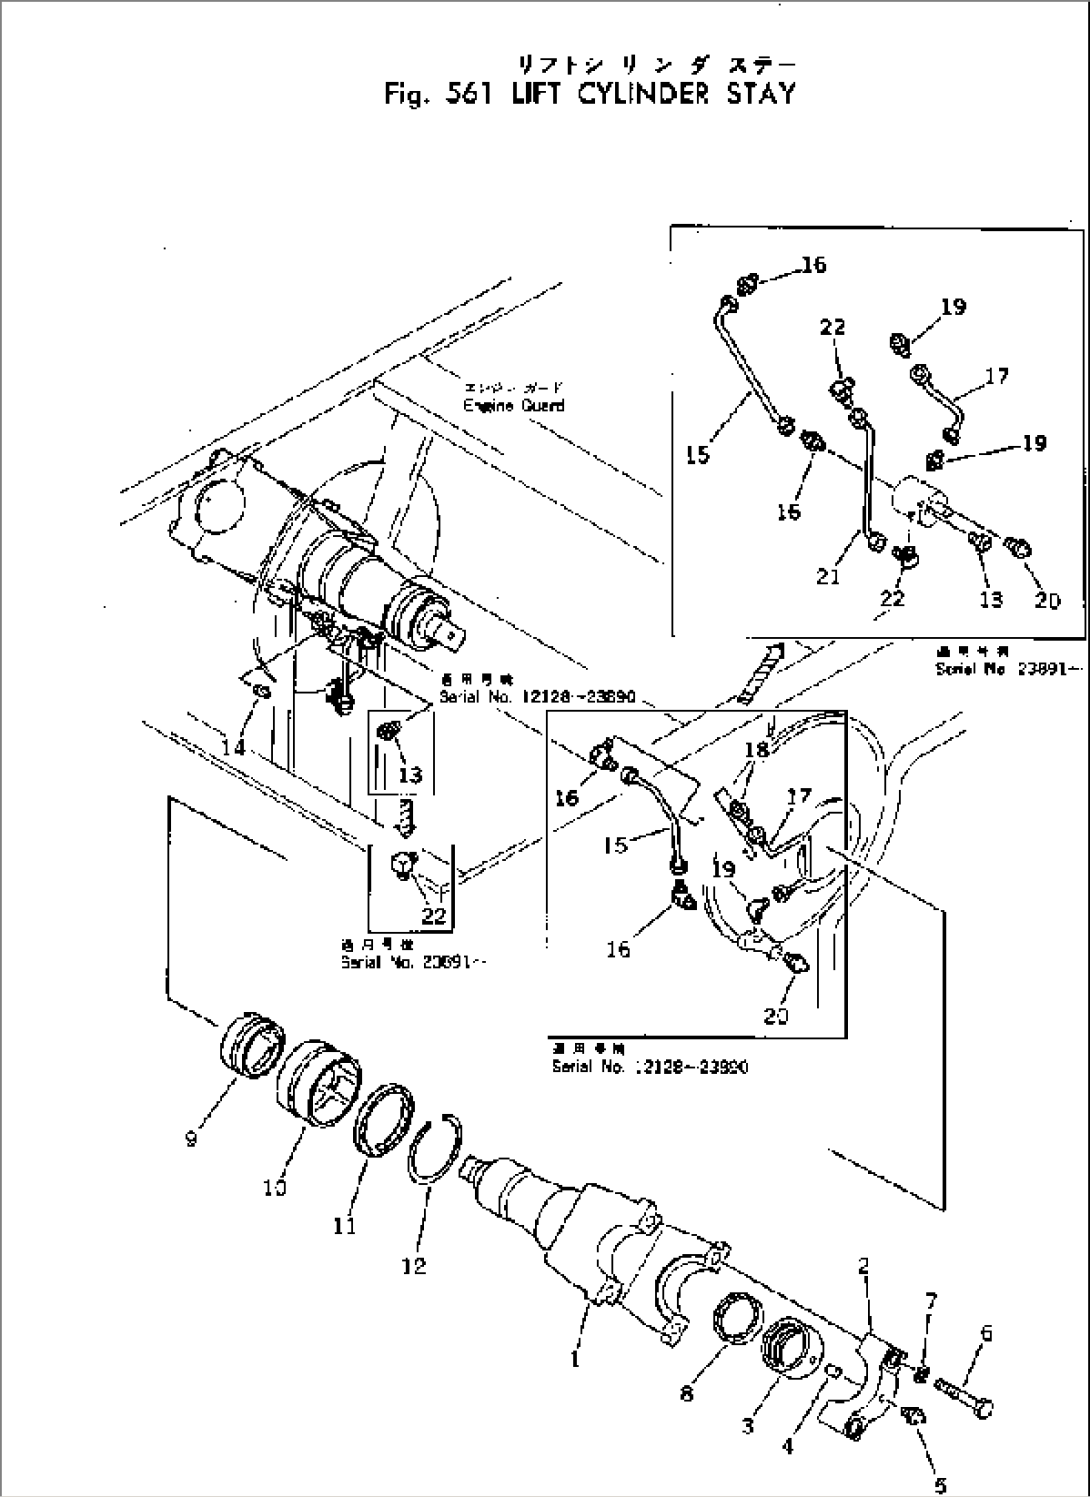 LIFT CYLINDER STAY